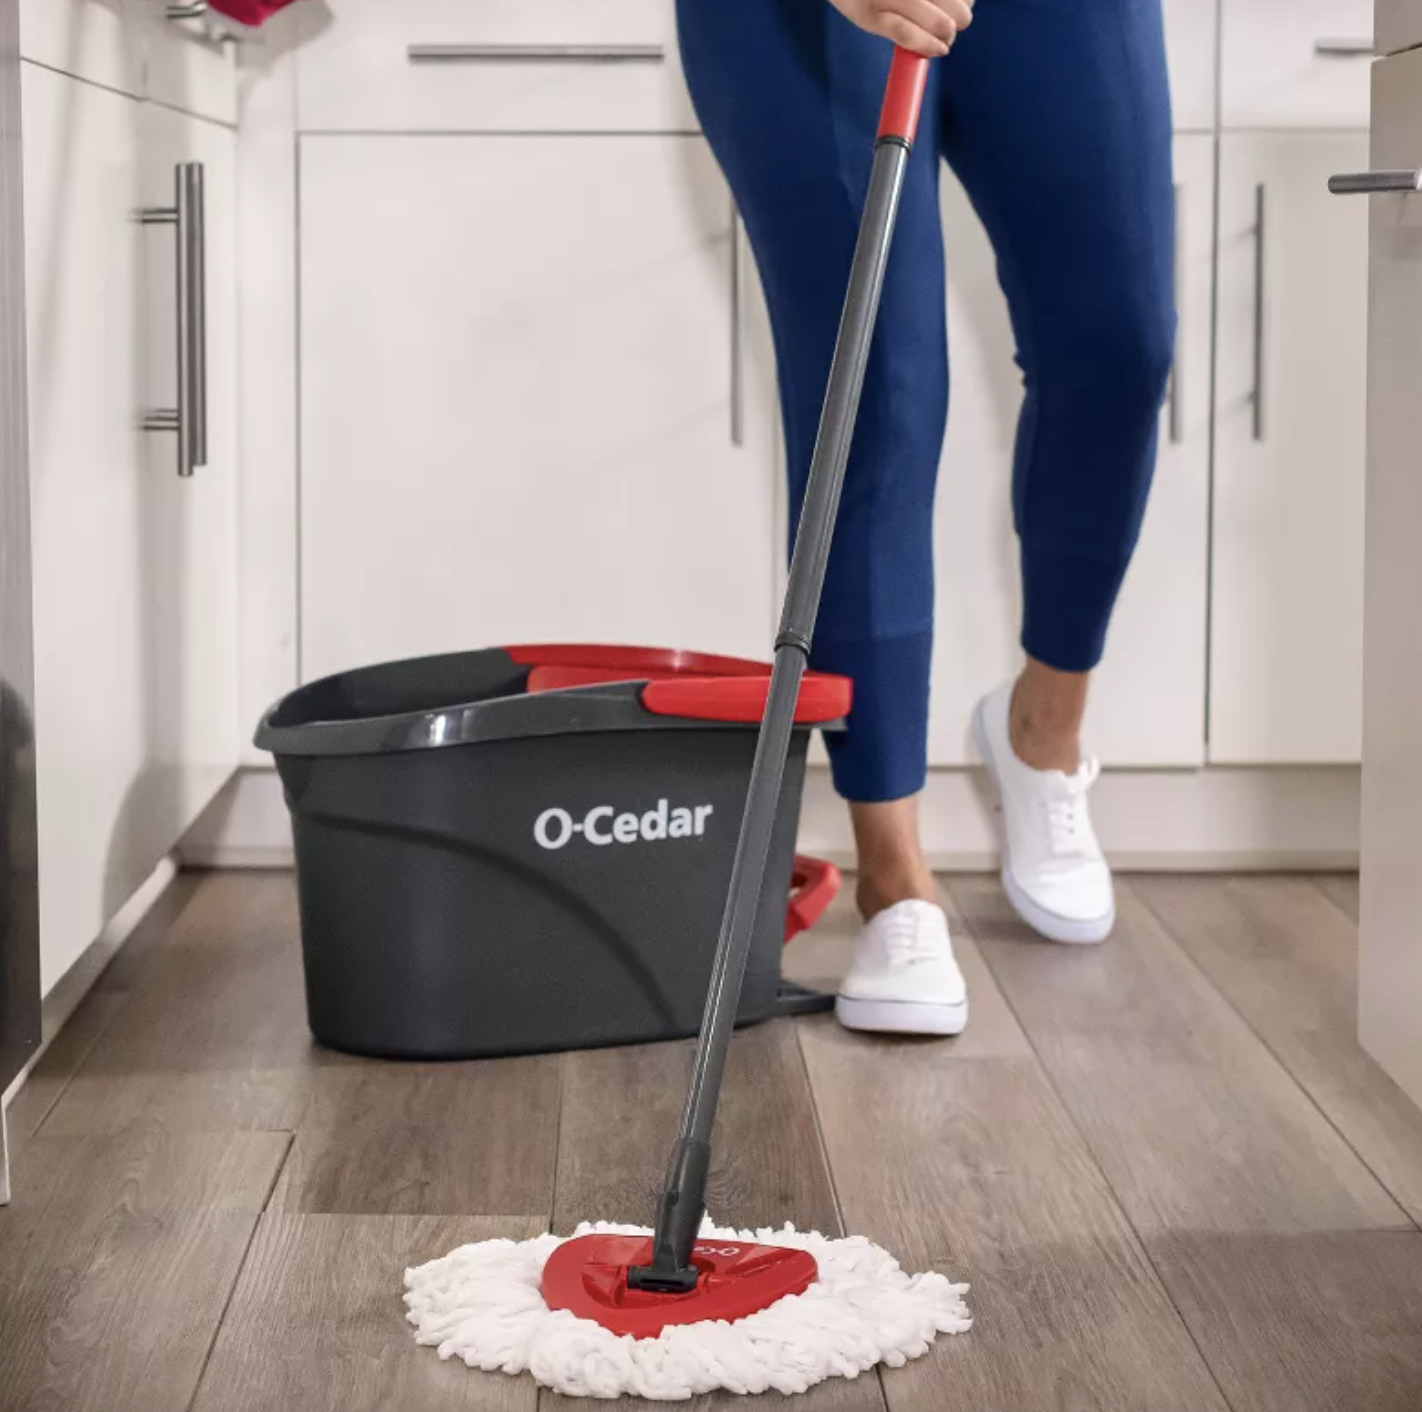 an O-Cedar mop and bucket being used in a kitchen